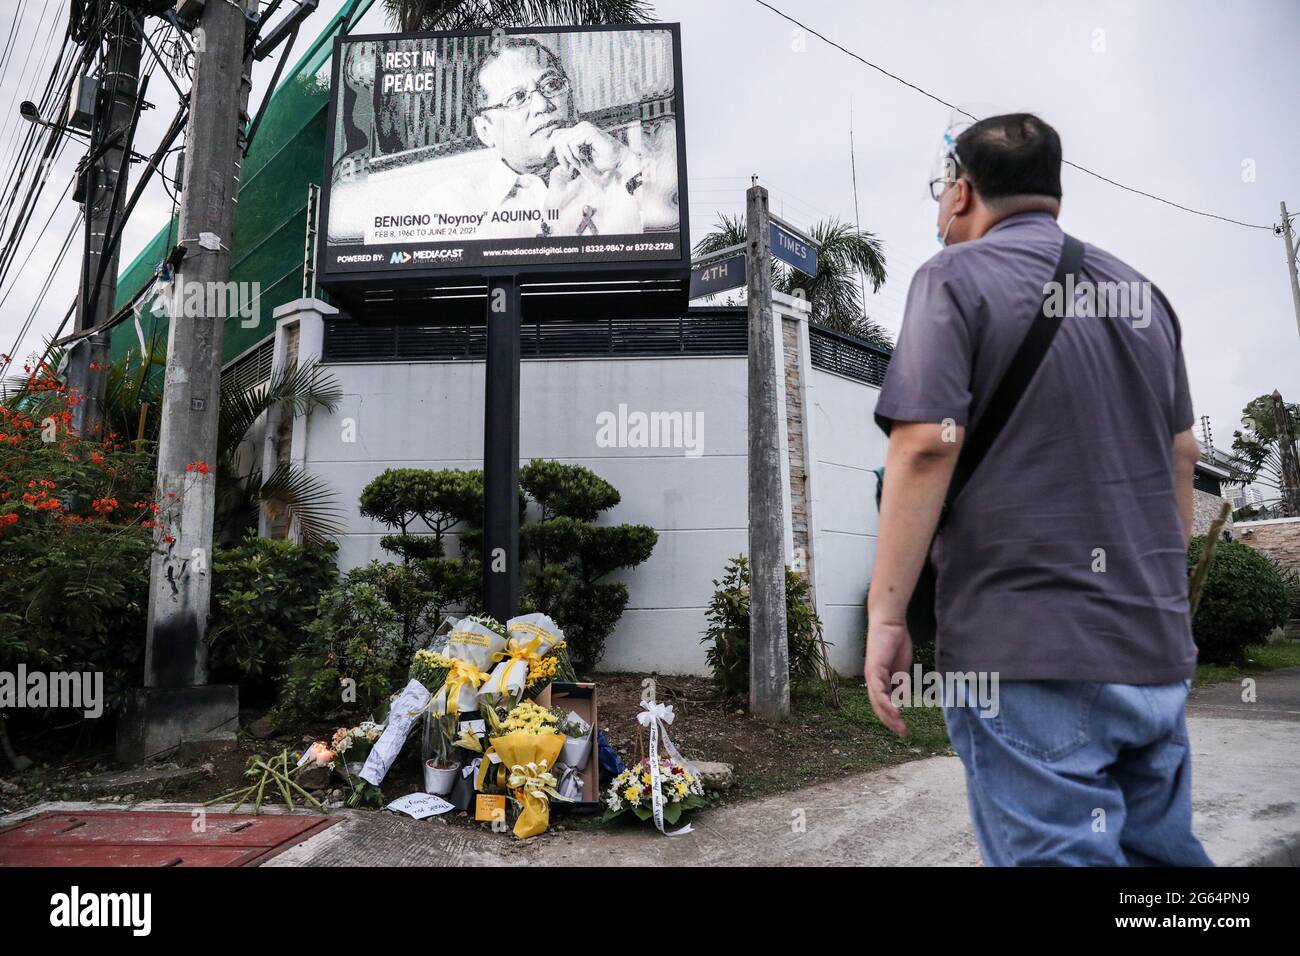 A man looks at a digital screen displaying the face of former Philippine President Benigno Aquino III who died at the age of 61 near his house in Manila, Philippines. Stock Photo